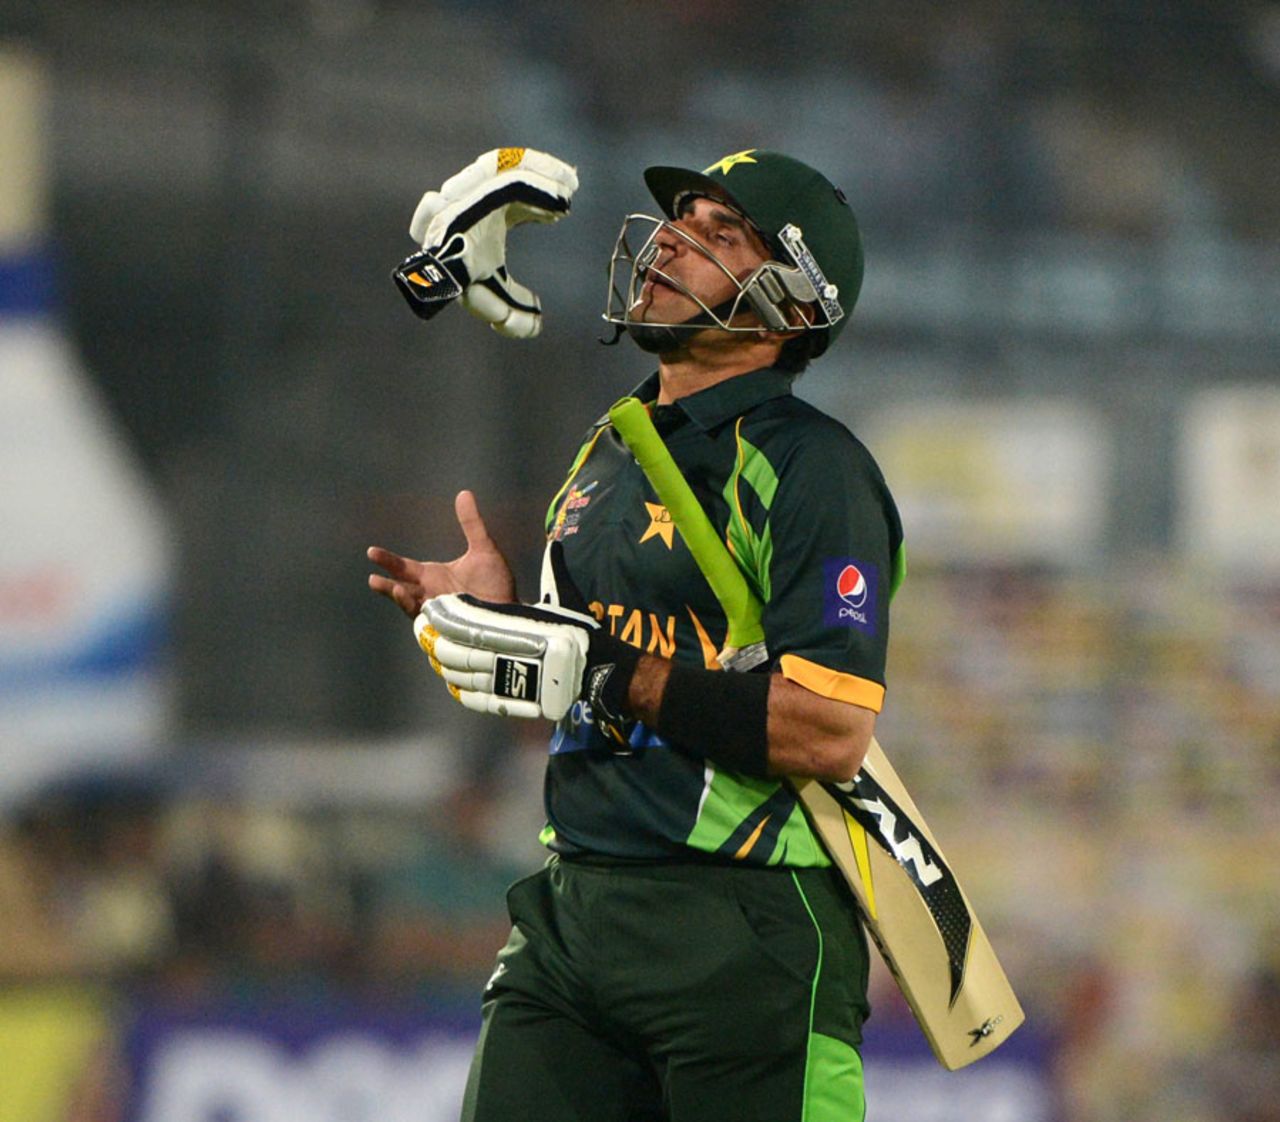 Misbah-ul-Haq was run out for the second match in a row, India v Pakistan, Asia Cup, Mirpur, March 2, 2014